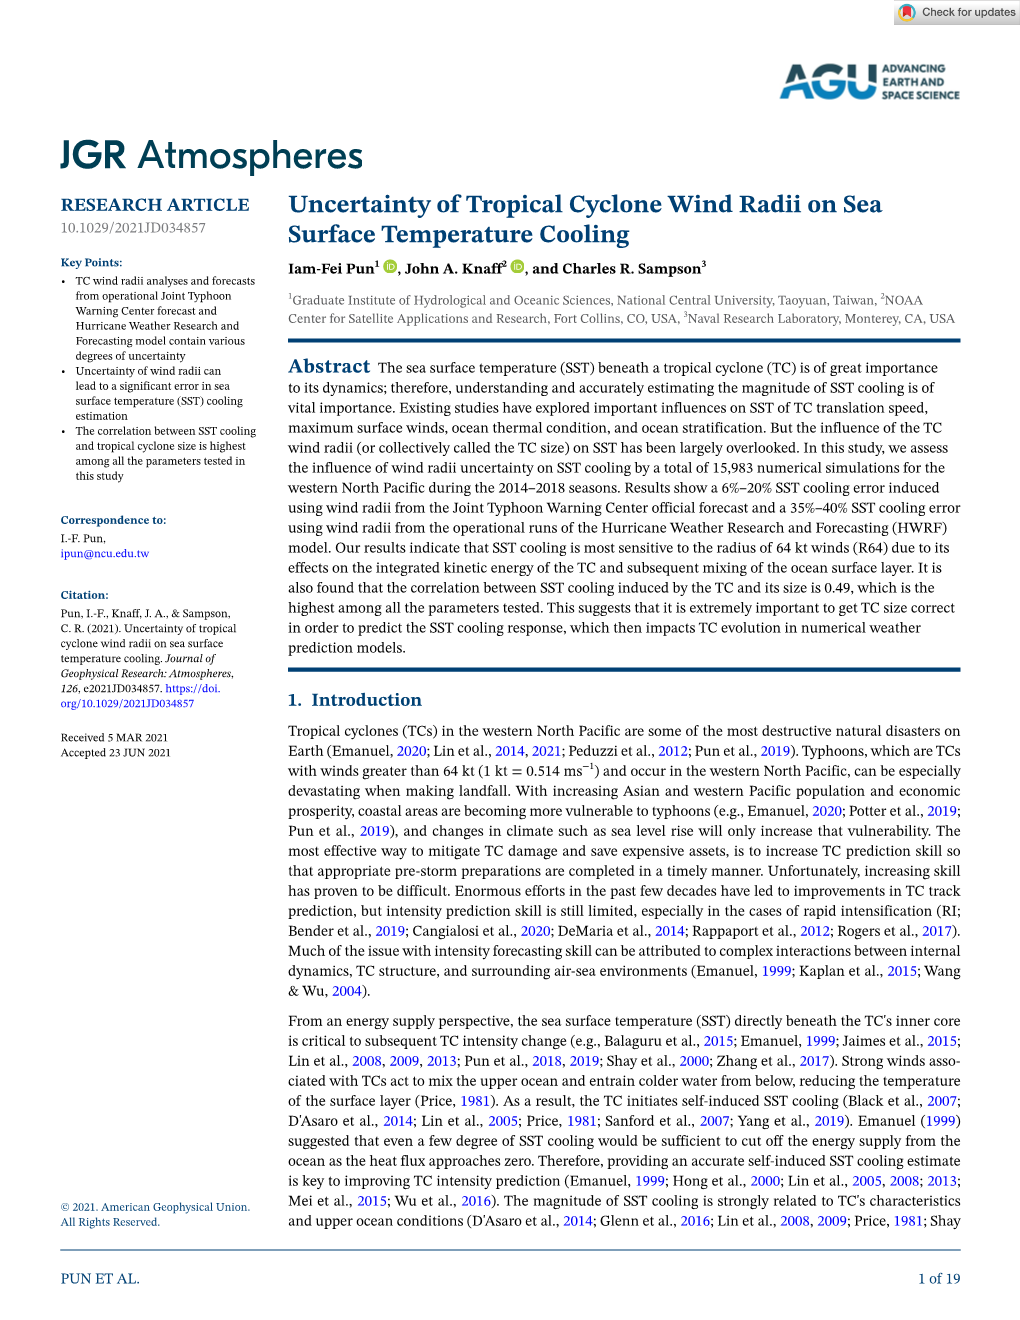 Uncertainty of Tropical Cyclone Wind Radii on Sea Surface Temperature